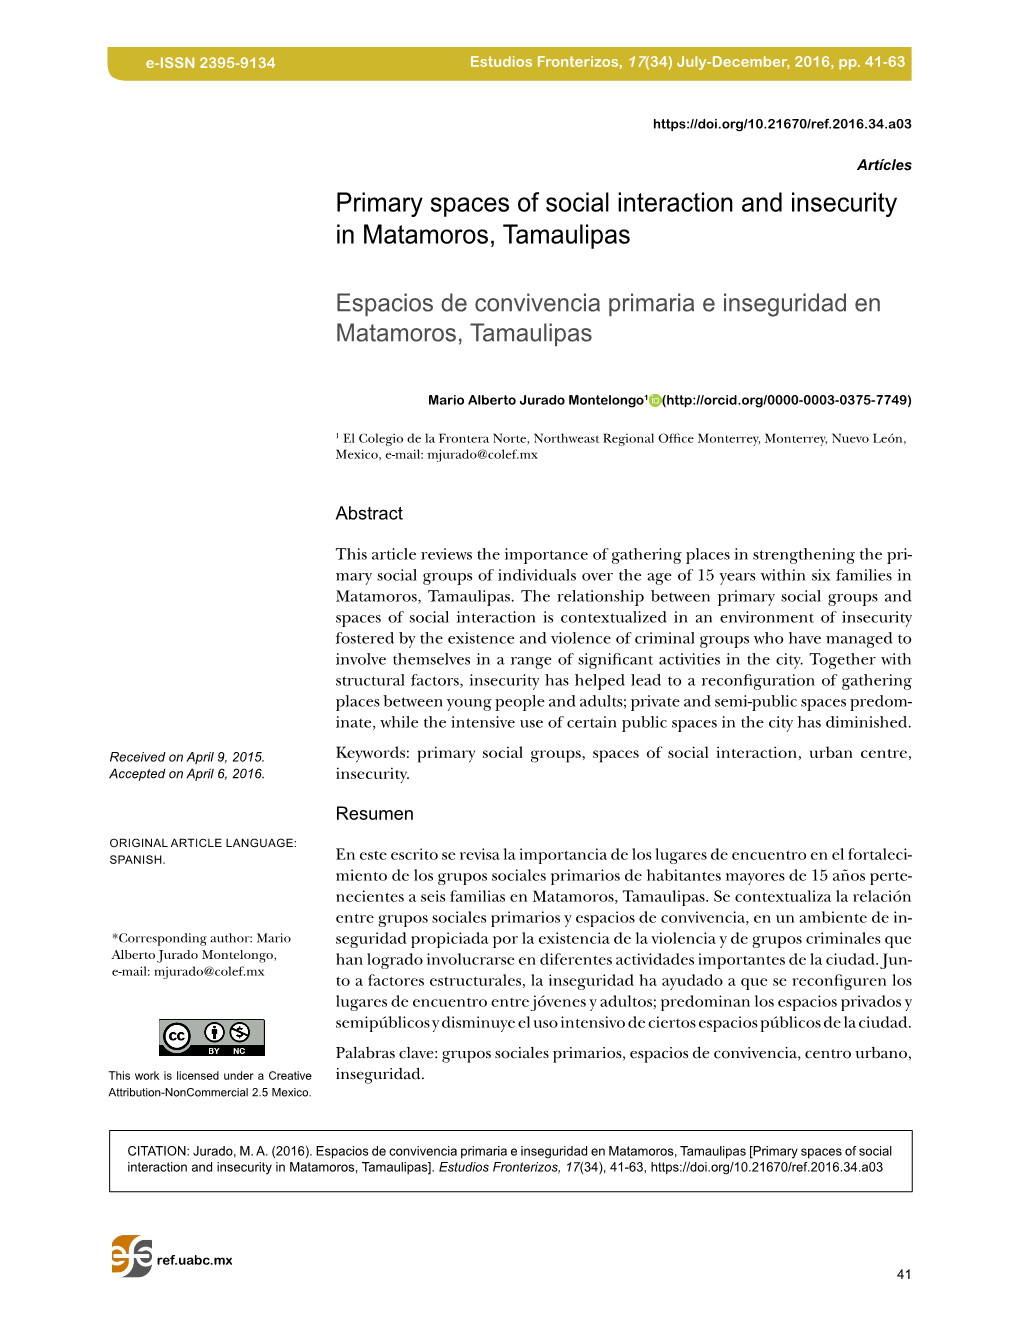 Primary Spaces of Social Interaction and Insecurity in Matamoros, Tamaulipas